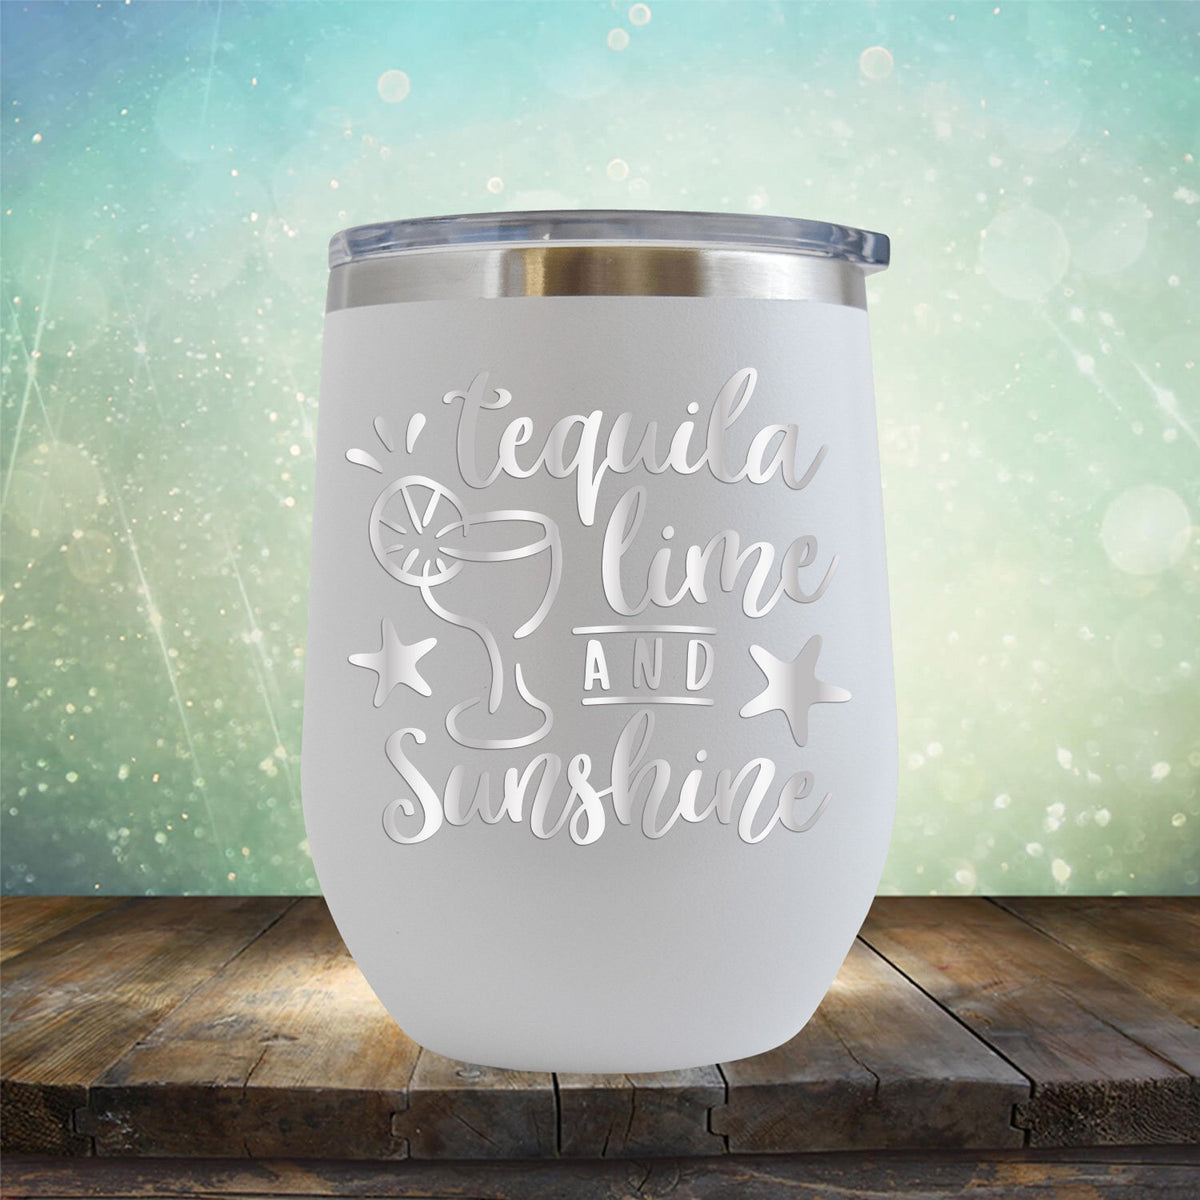 Tequila Lime and Sunshine - Stemless Wine Cup